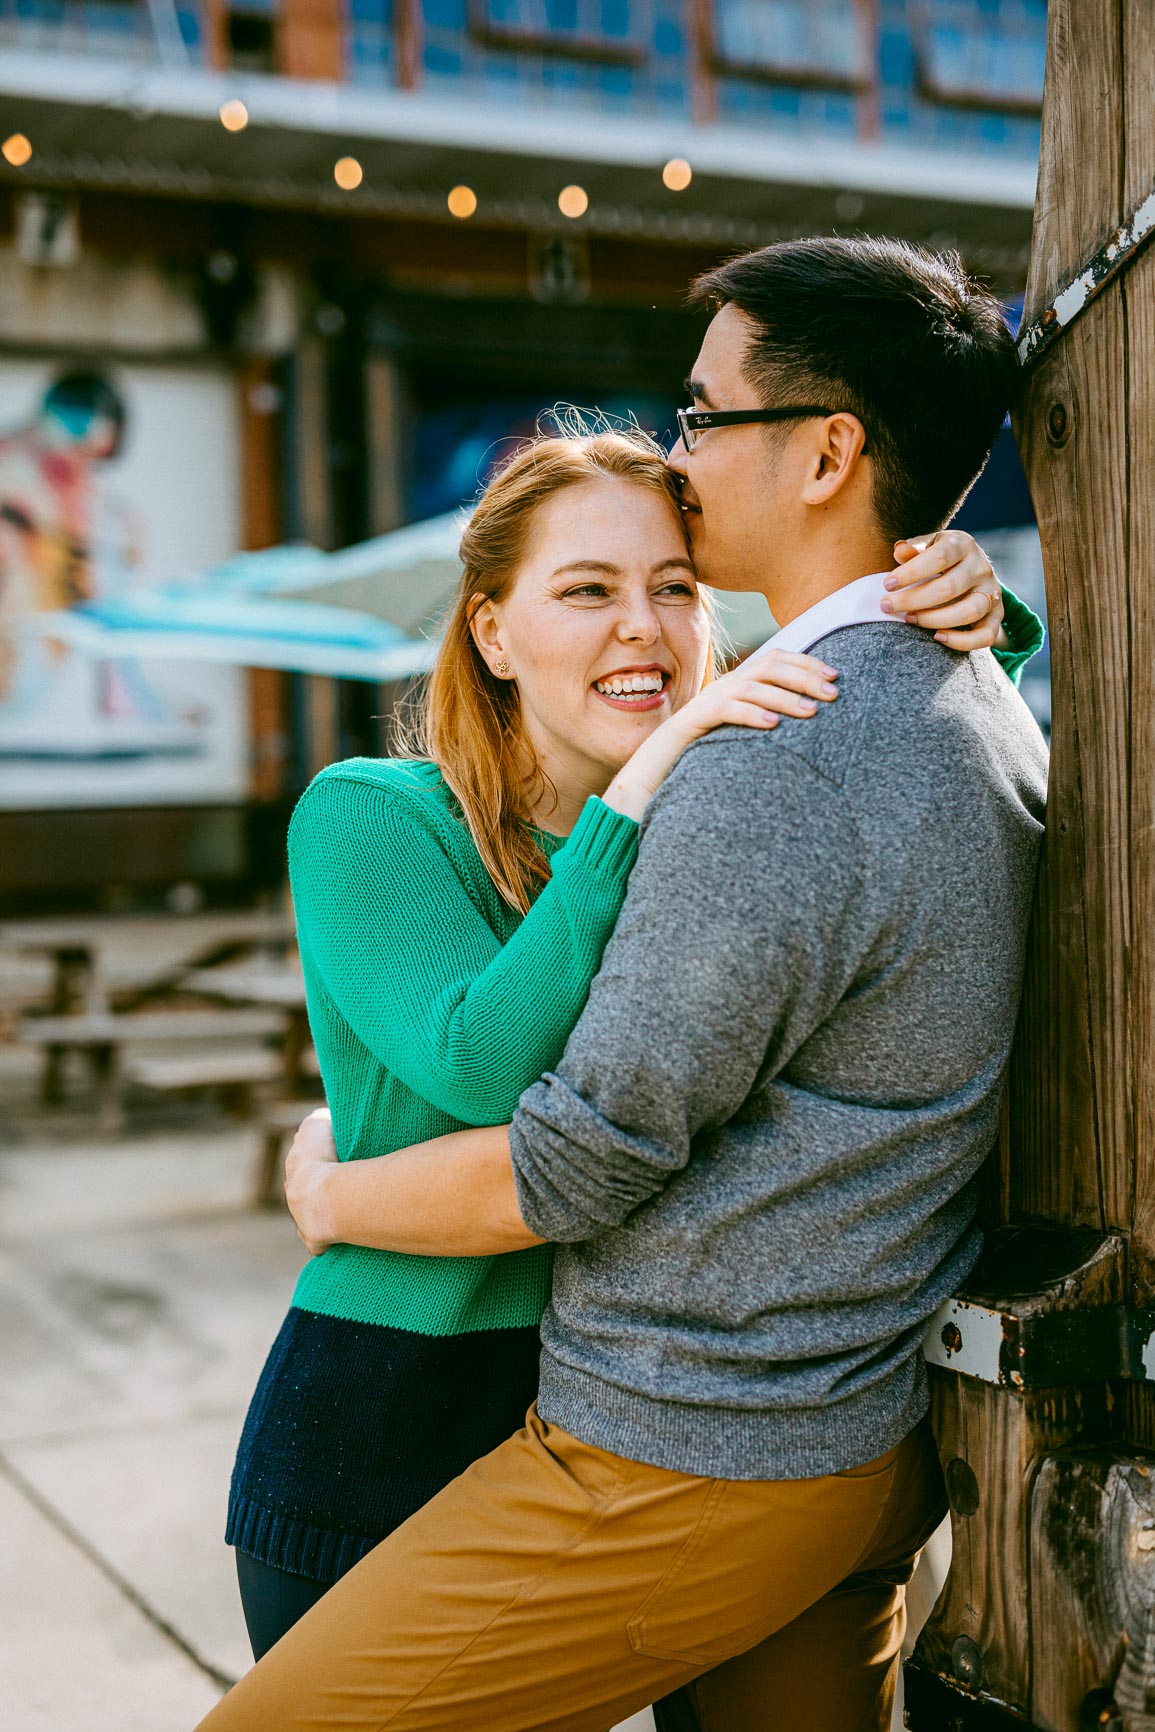 Camp North End engagement session shot by Nhieu Tang Photography | nhieutang.com